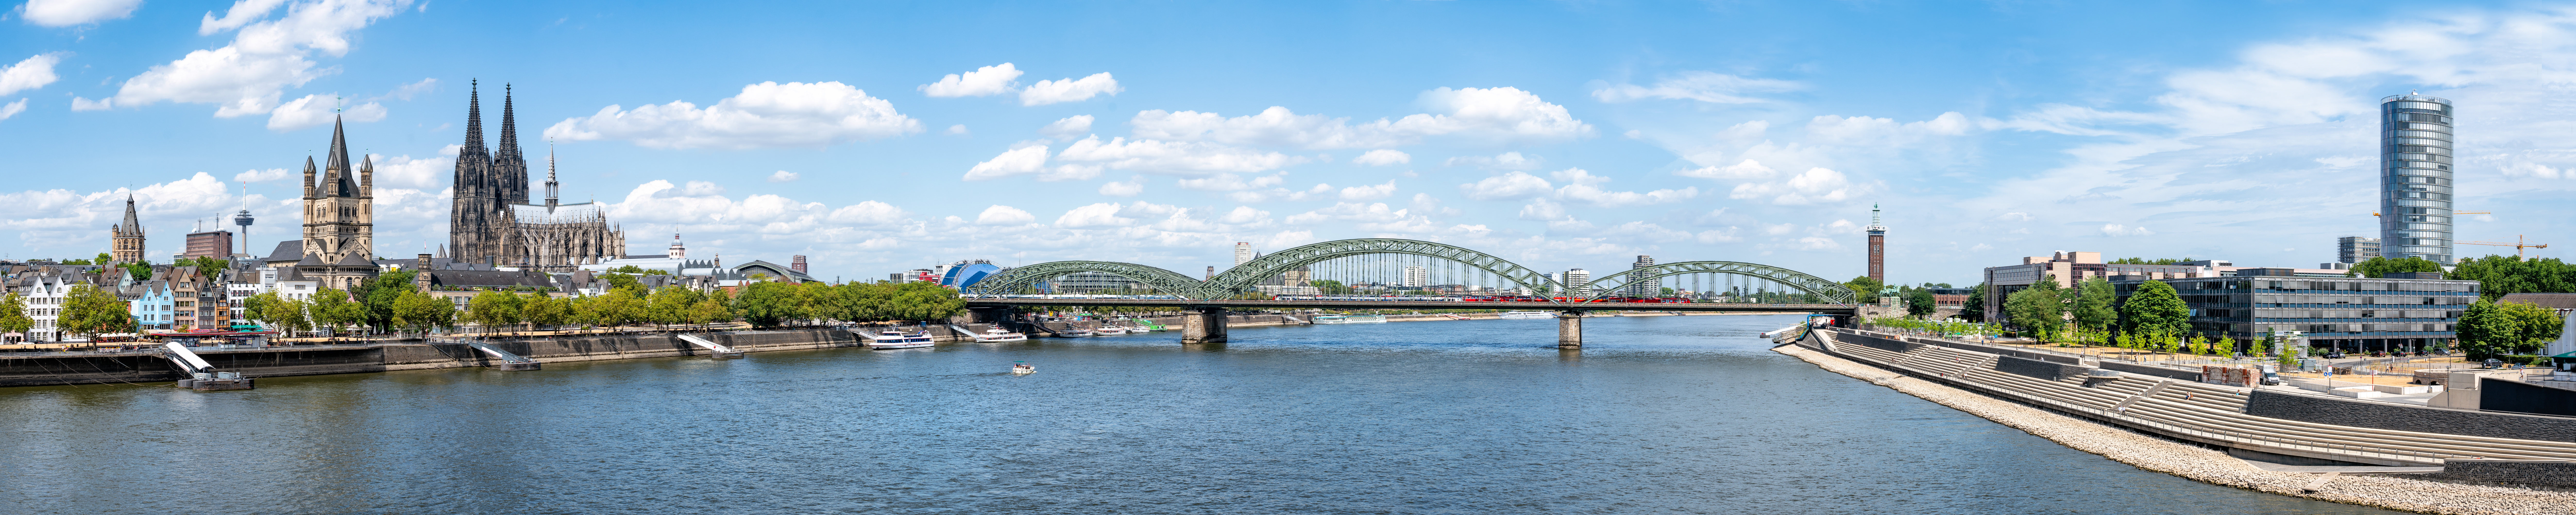 Cologne,City,Skyline,Along,The,Rhine,River,With,Hohenzollern,Bridge,